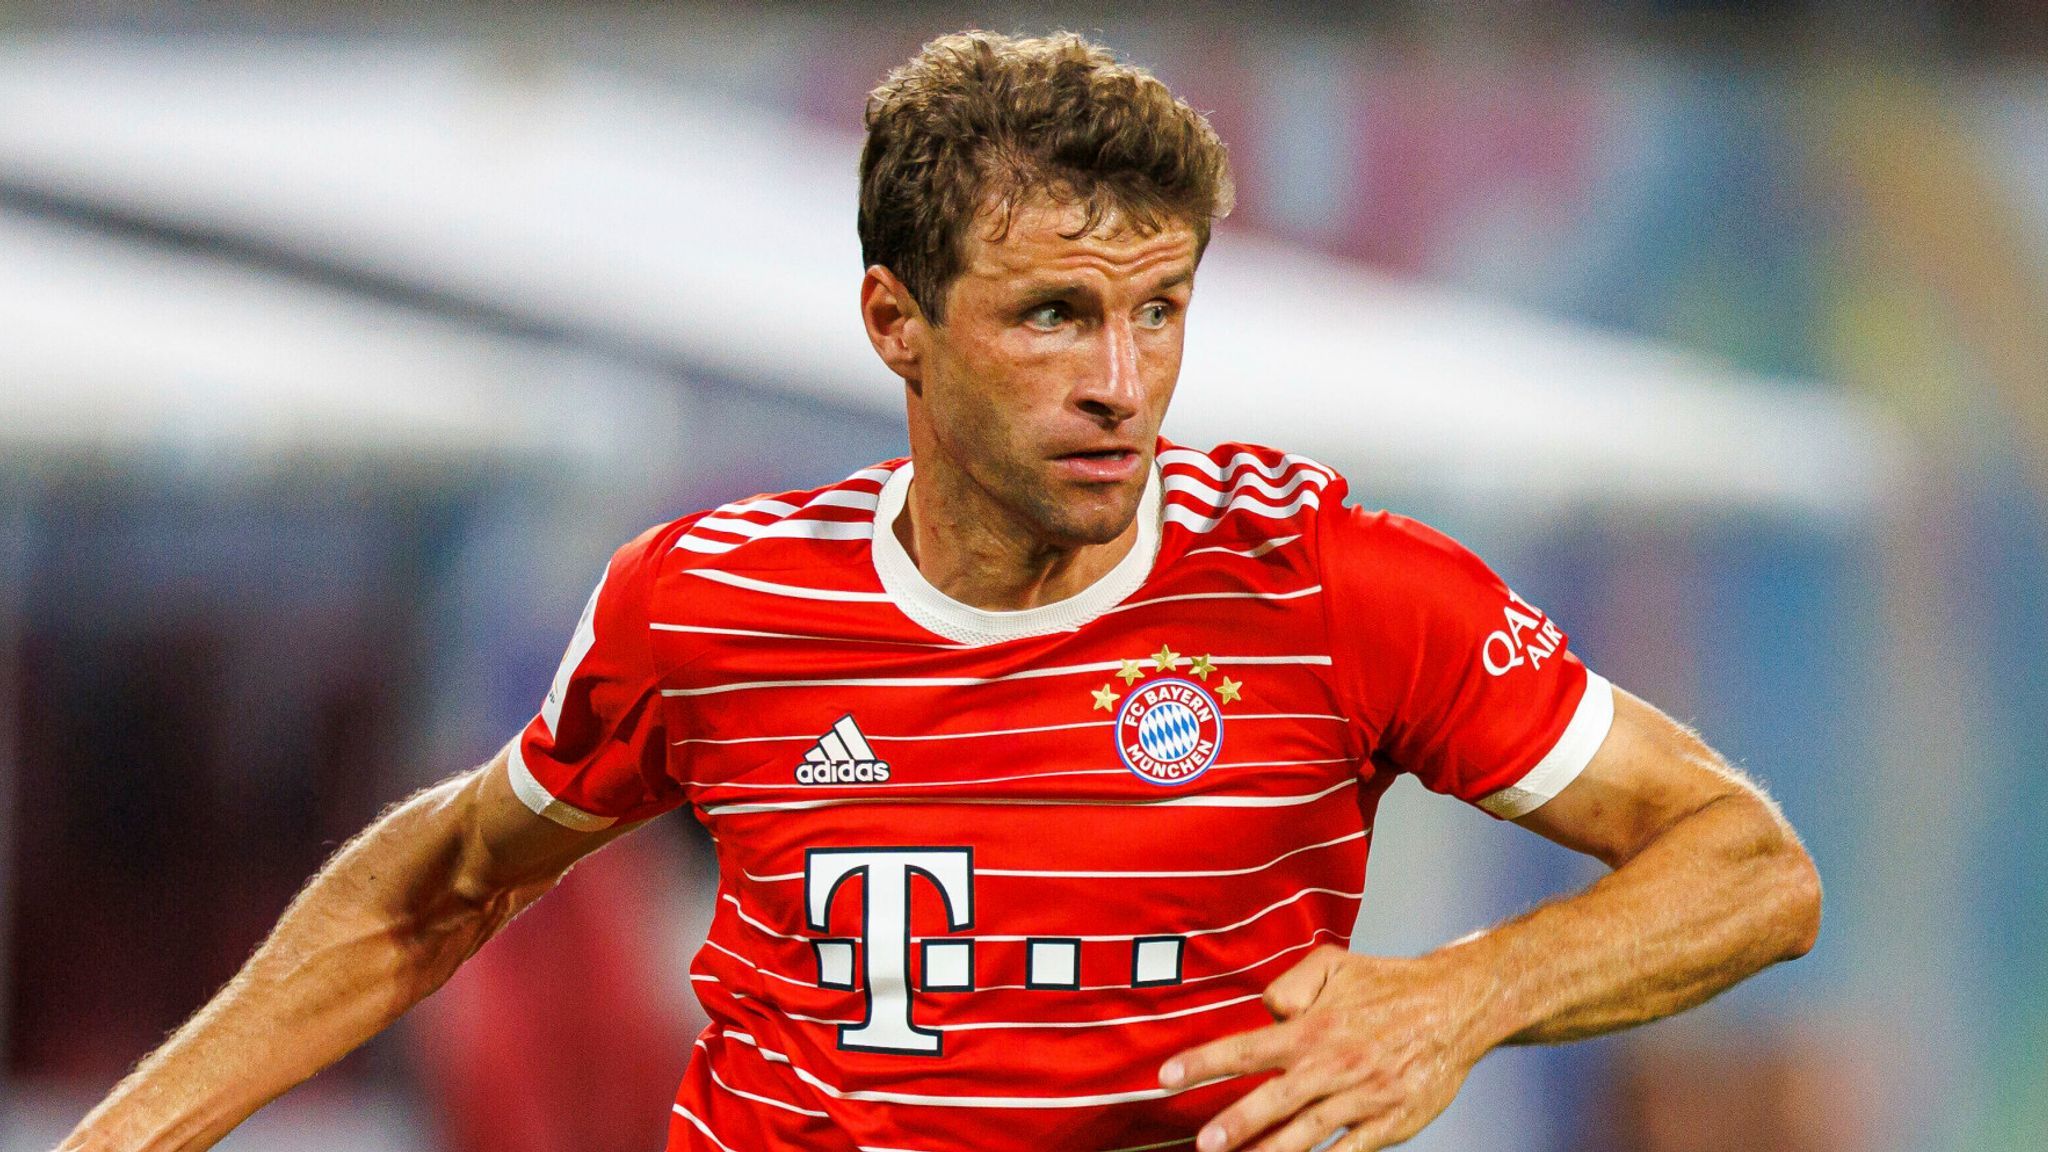 Thomas Müller announces the end of his career with the German national team